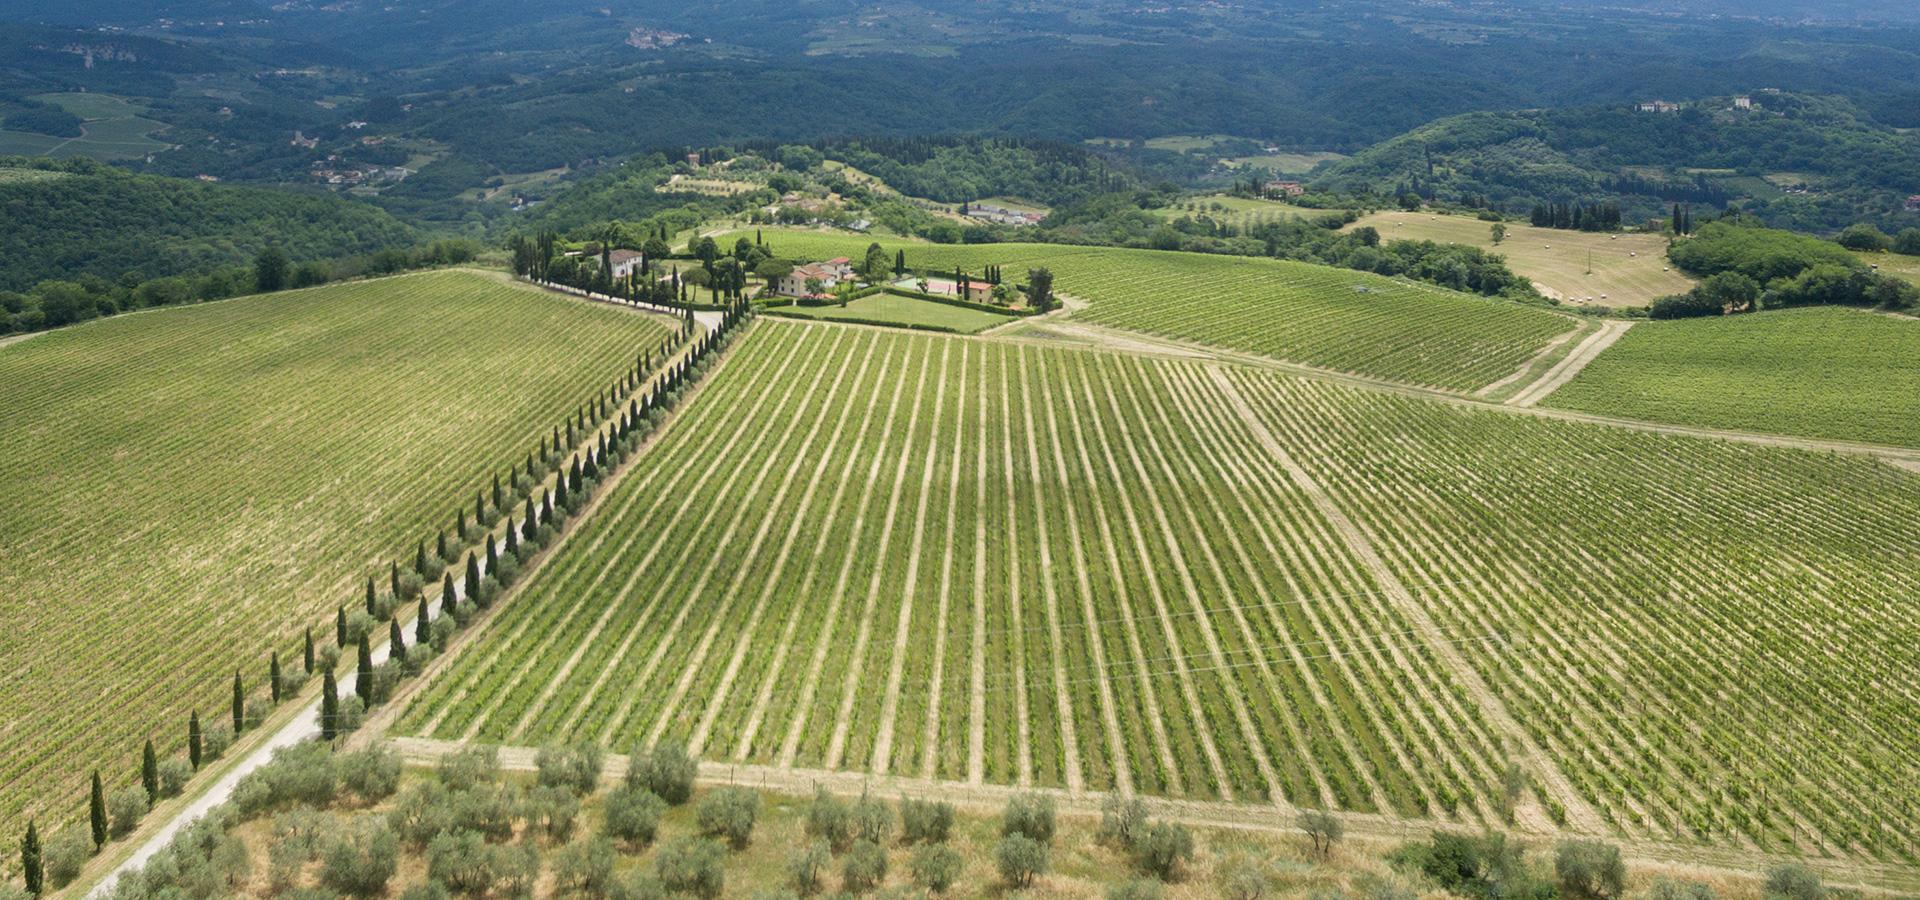 Sale of  Chianti | Fattoria Pagnana – on site sales of wine, Florence, Tuscany